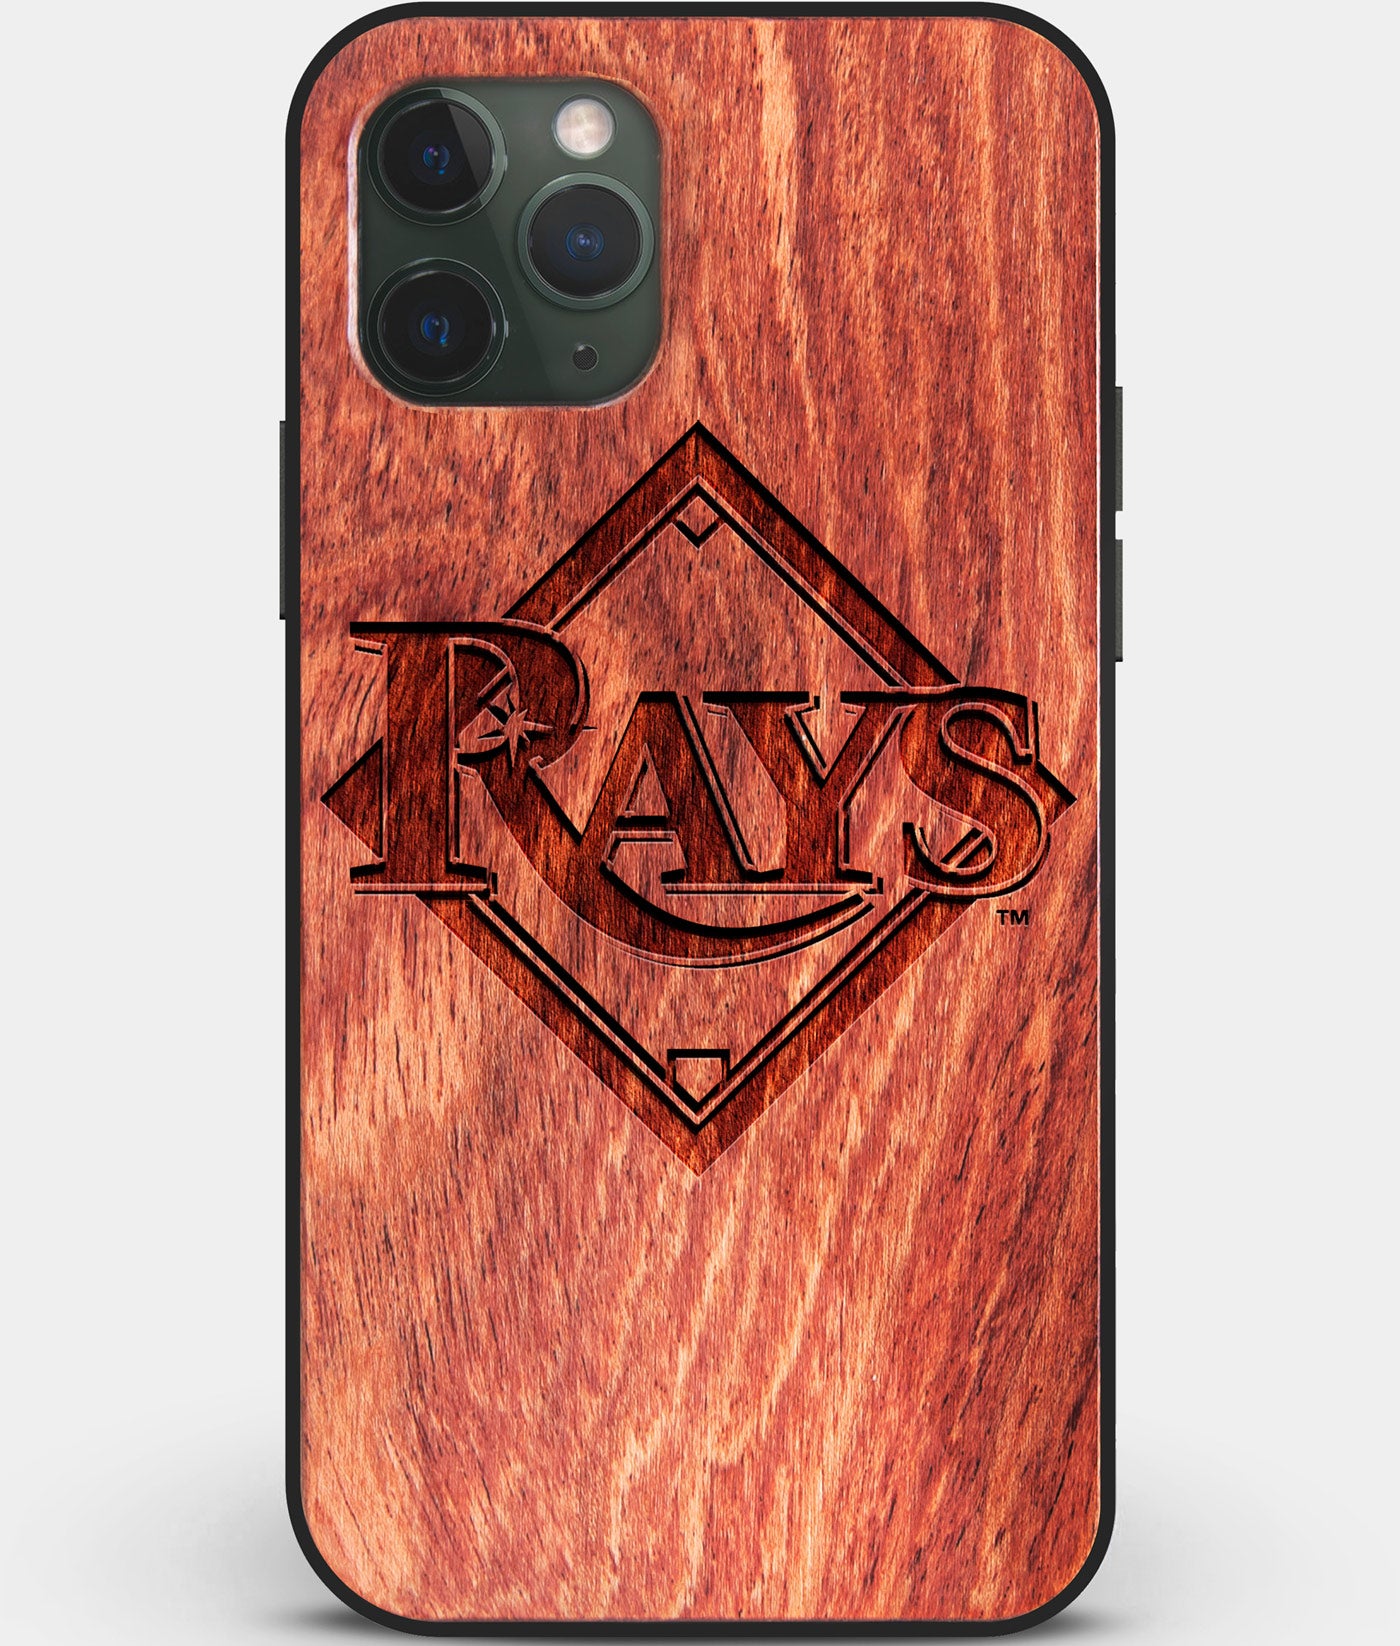 Custom Carved Wood Tampa Bay Rays iPhone 11 Pro Case | Personalized Mahogany Wood Tampa Bay Rays Cover, Birthday Gift, Gifts For Him, Monogrammed Gift For Fan | by Engraved In Nature